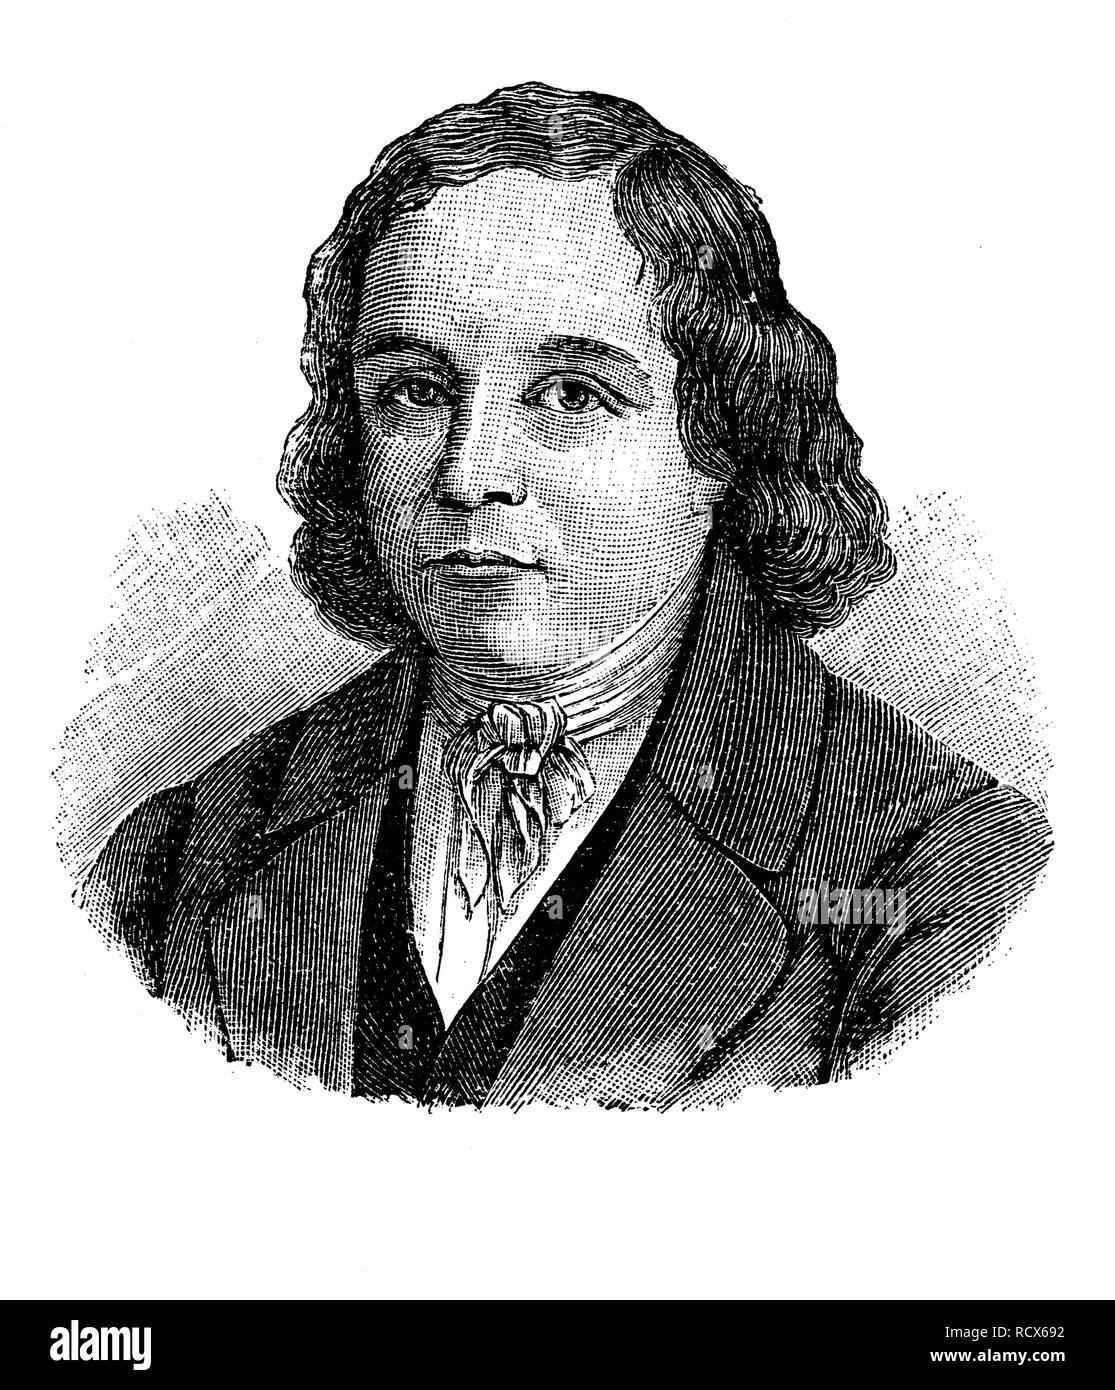 Johann Georg August Wirth, 1798 - 1848, a German lawyer, writer and politician of the Vormaerz period, wood engraving Stock Photo